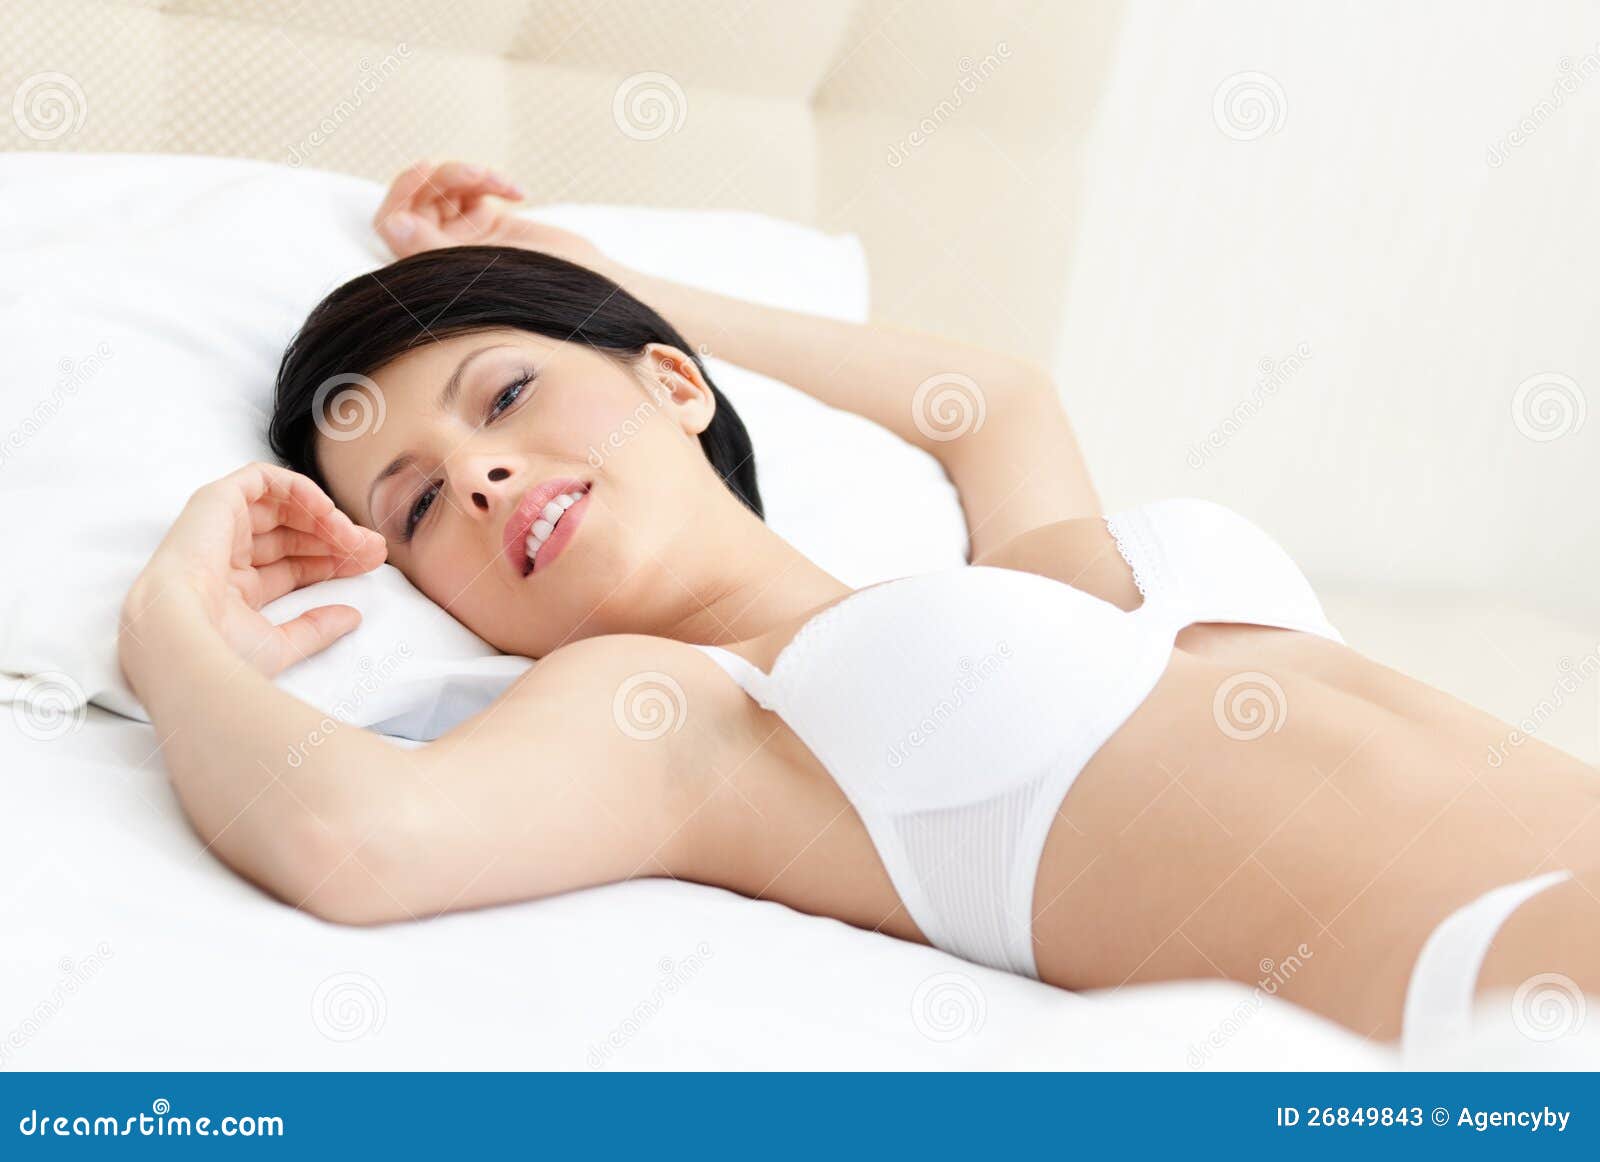 Woman in White Underwear is Lying in the Soft Bed Stock Image - Image of  bedroom, girl: 26849843